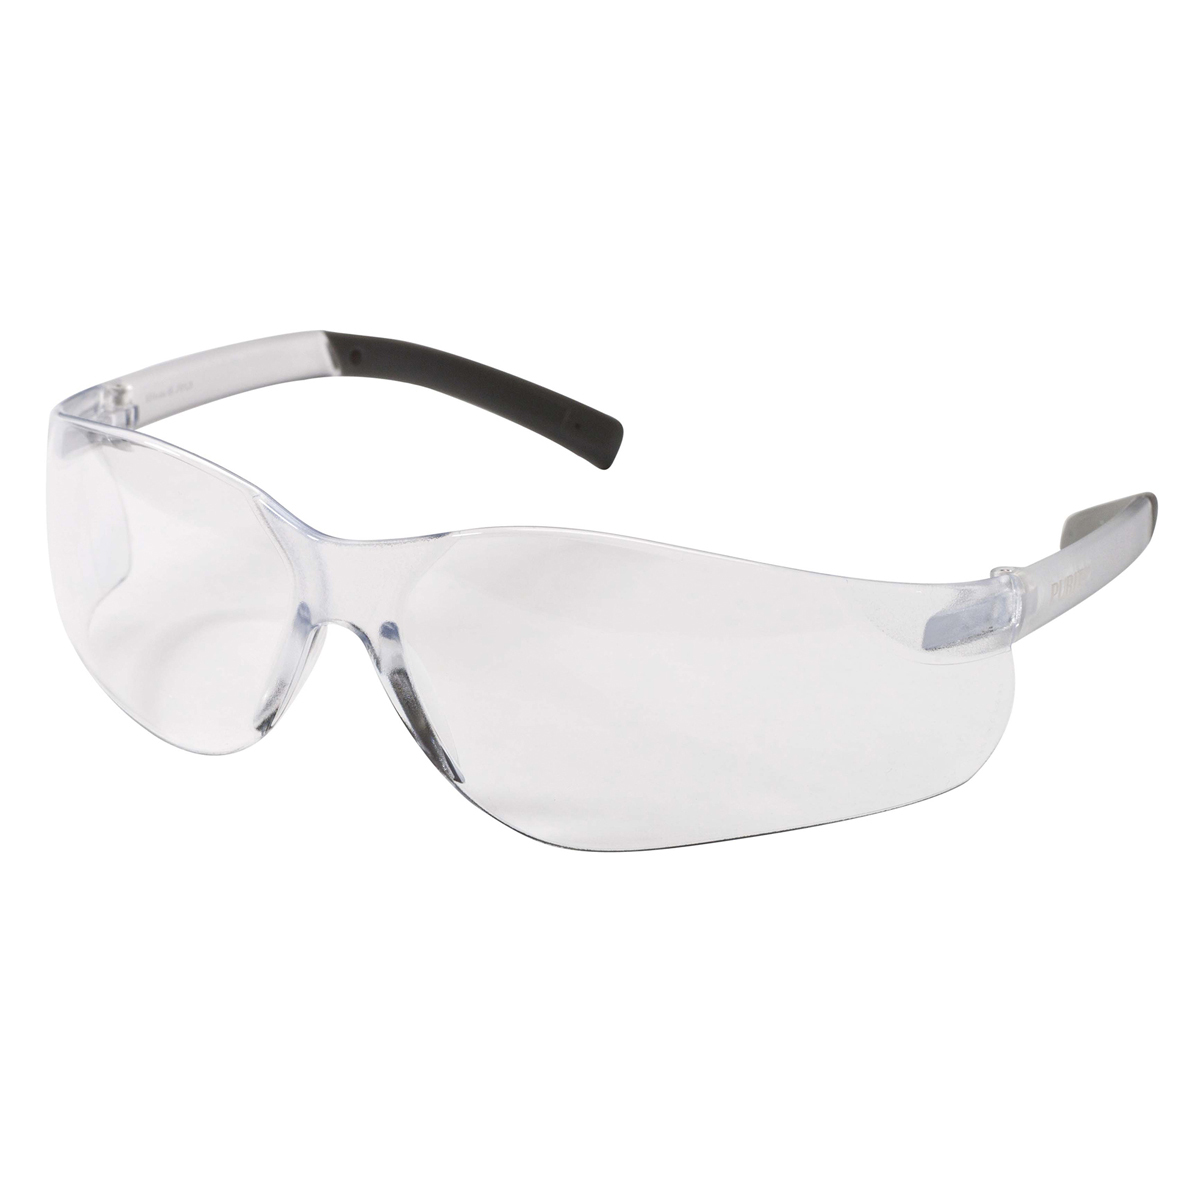 Kimberly-Clark Professional* KleenGuard™ Purity* Clear Safety Glasses With Clear Hard Coat Lens (Availability restrictions apply